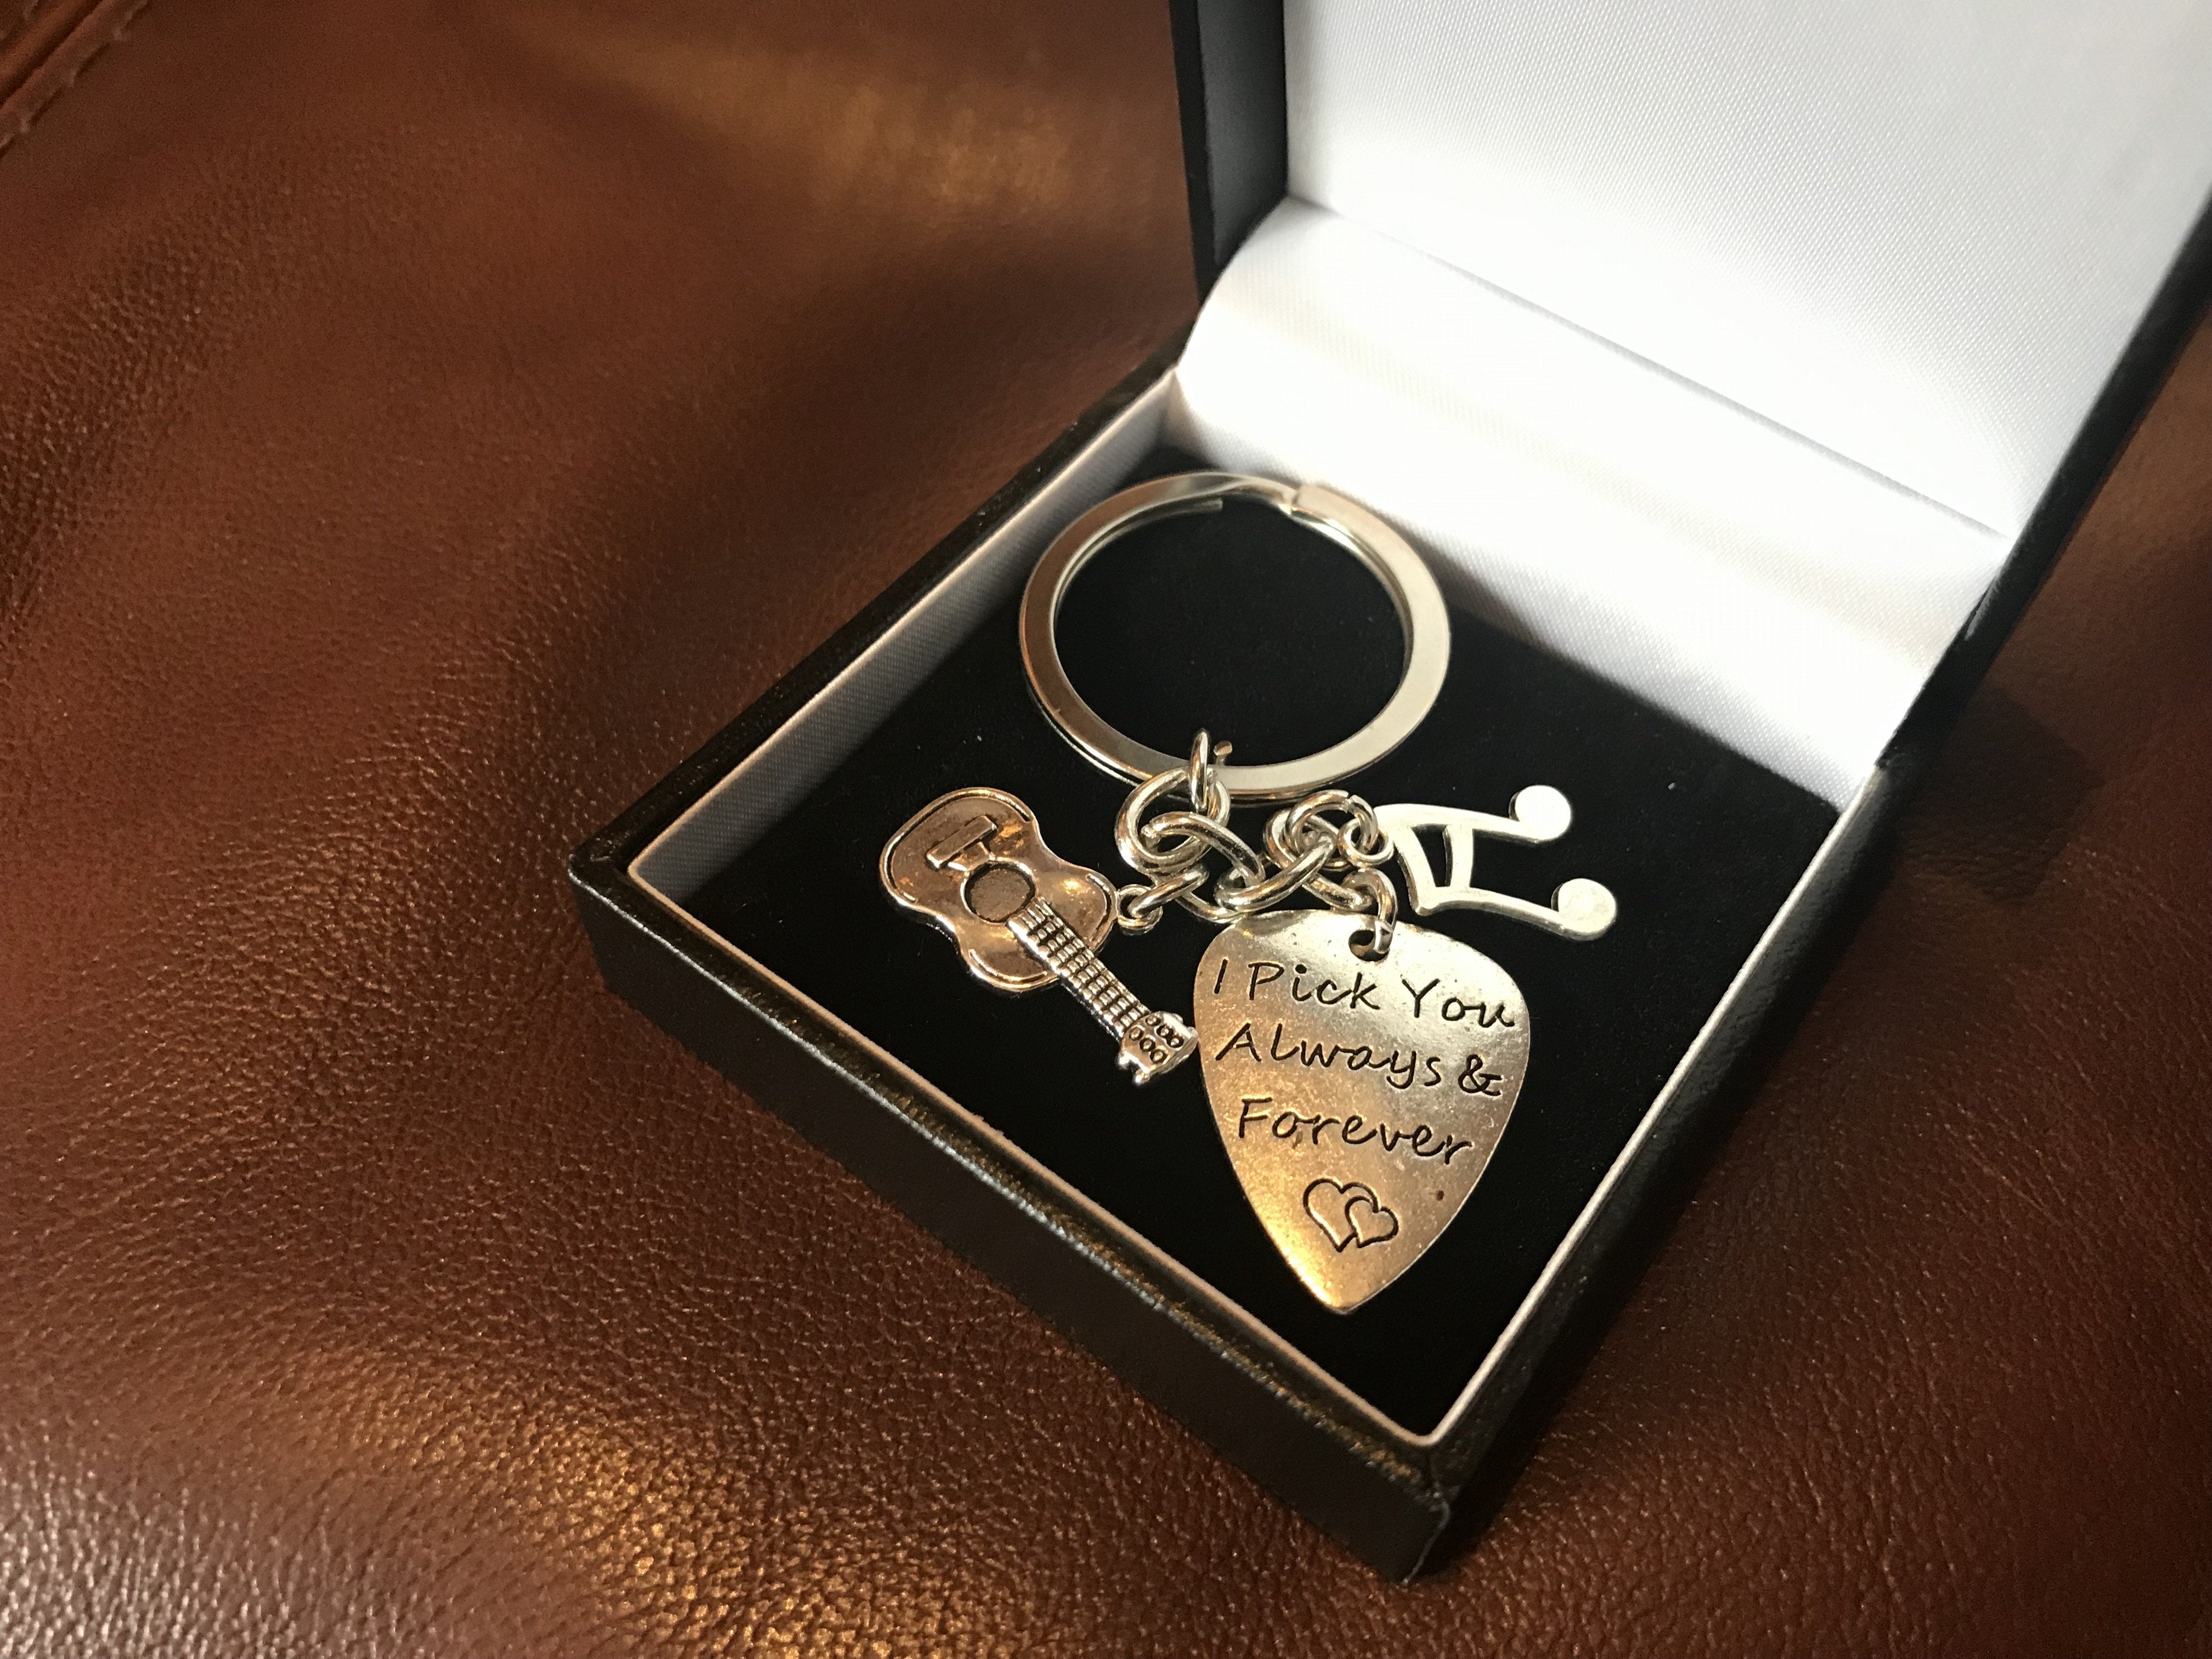 SMJ Hand Made Guitar Pick Keyring & Gift Box. Beautiful Guitar Gift (£1 Goes to Butterfly Conservation), Accessory for sale at Richards Guitars.